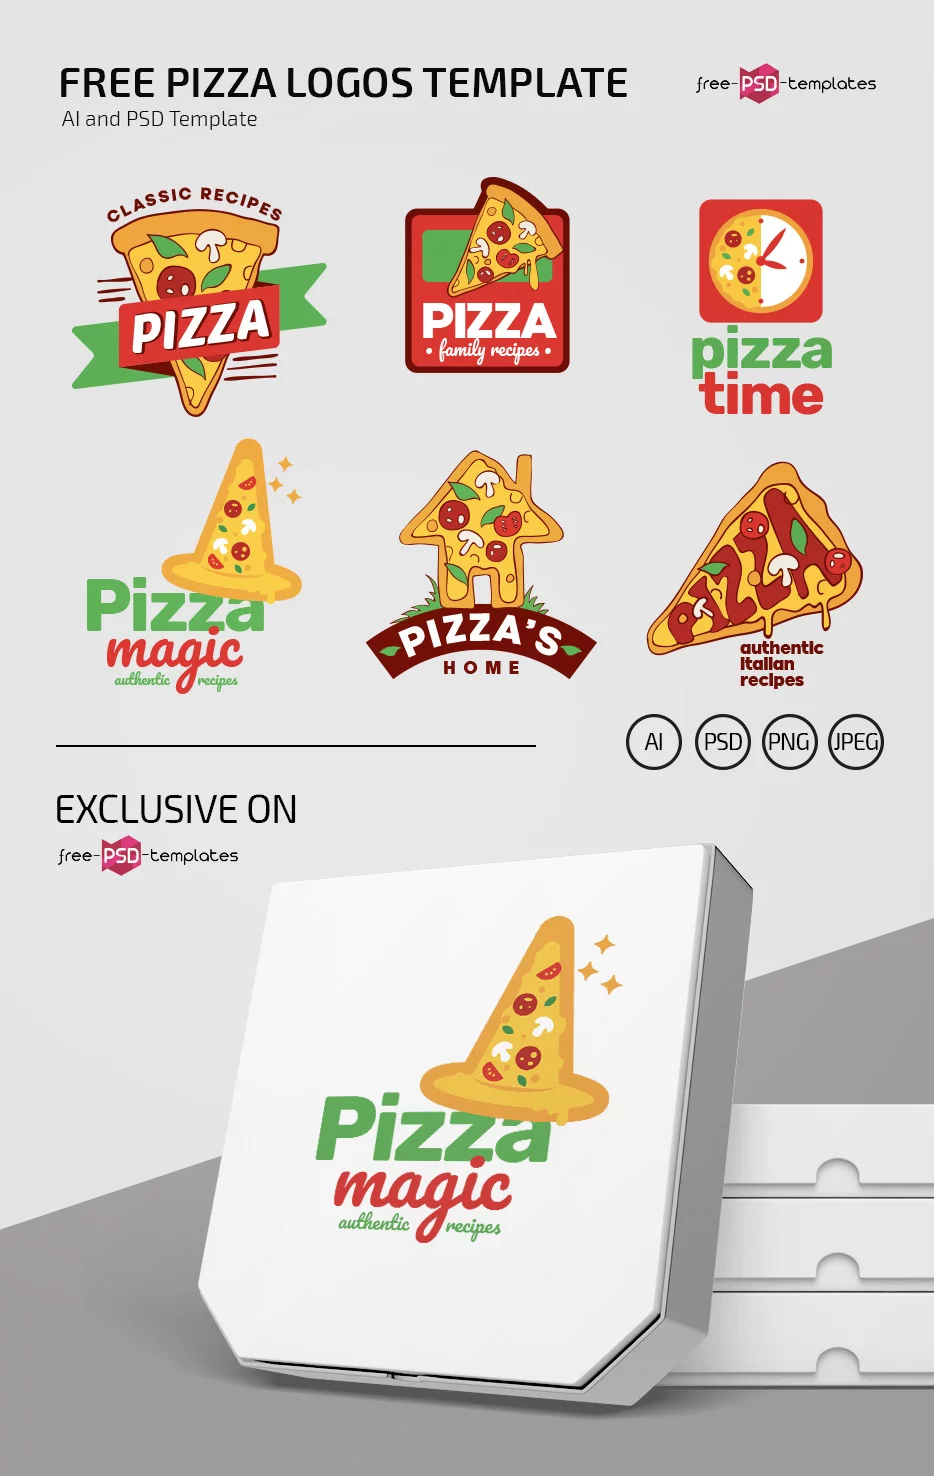 Free Pizza Logos Template